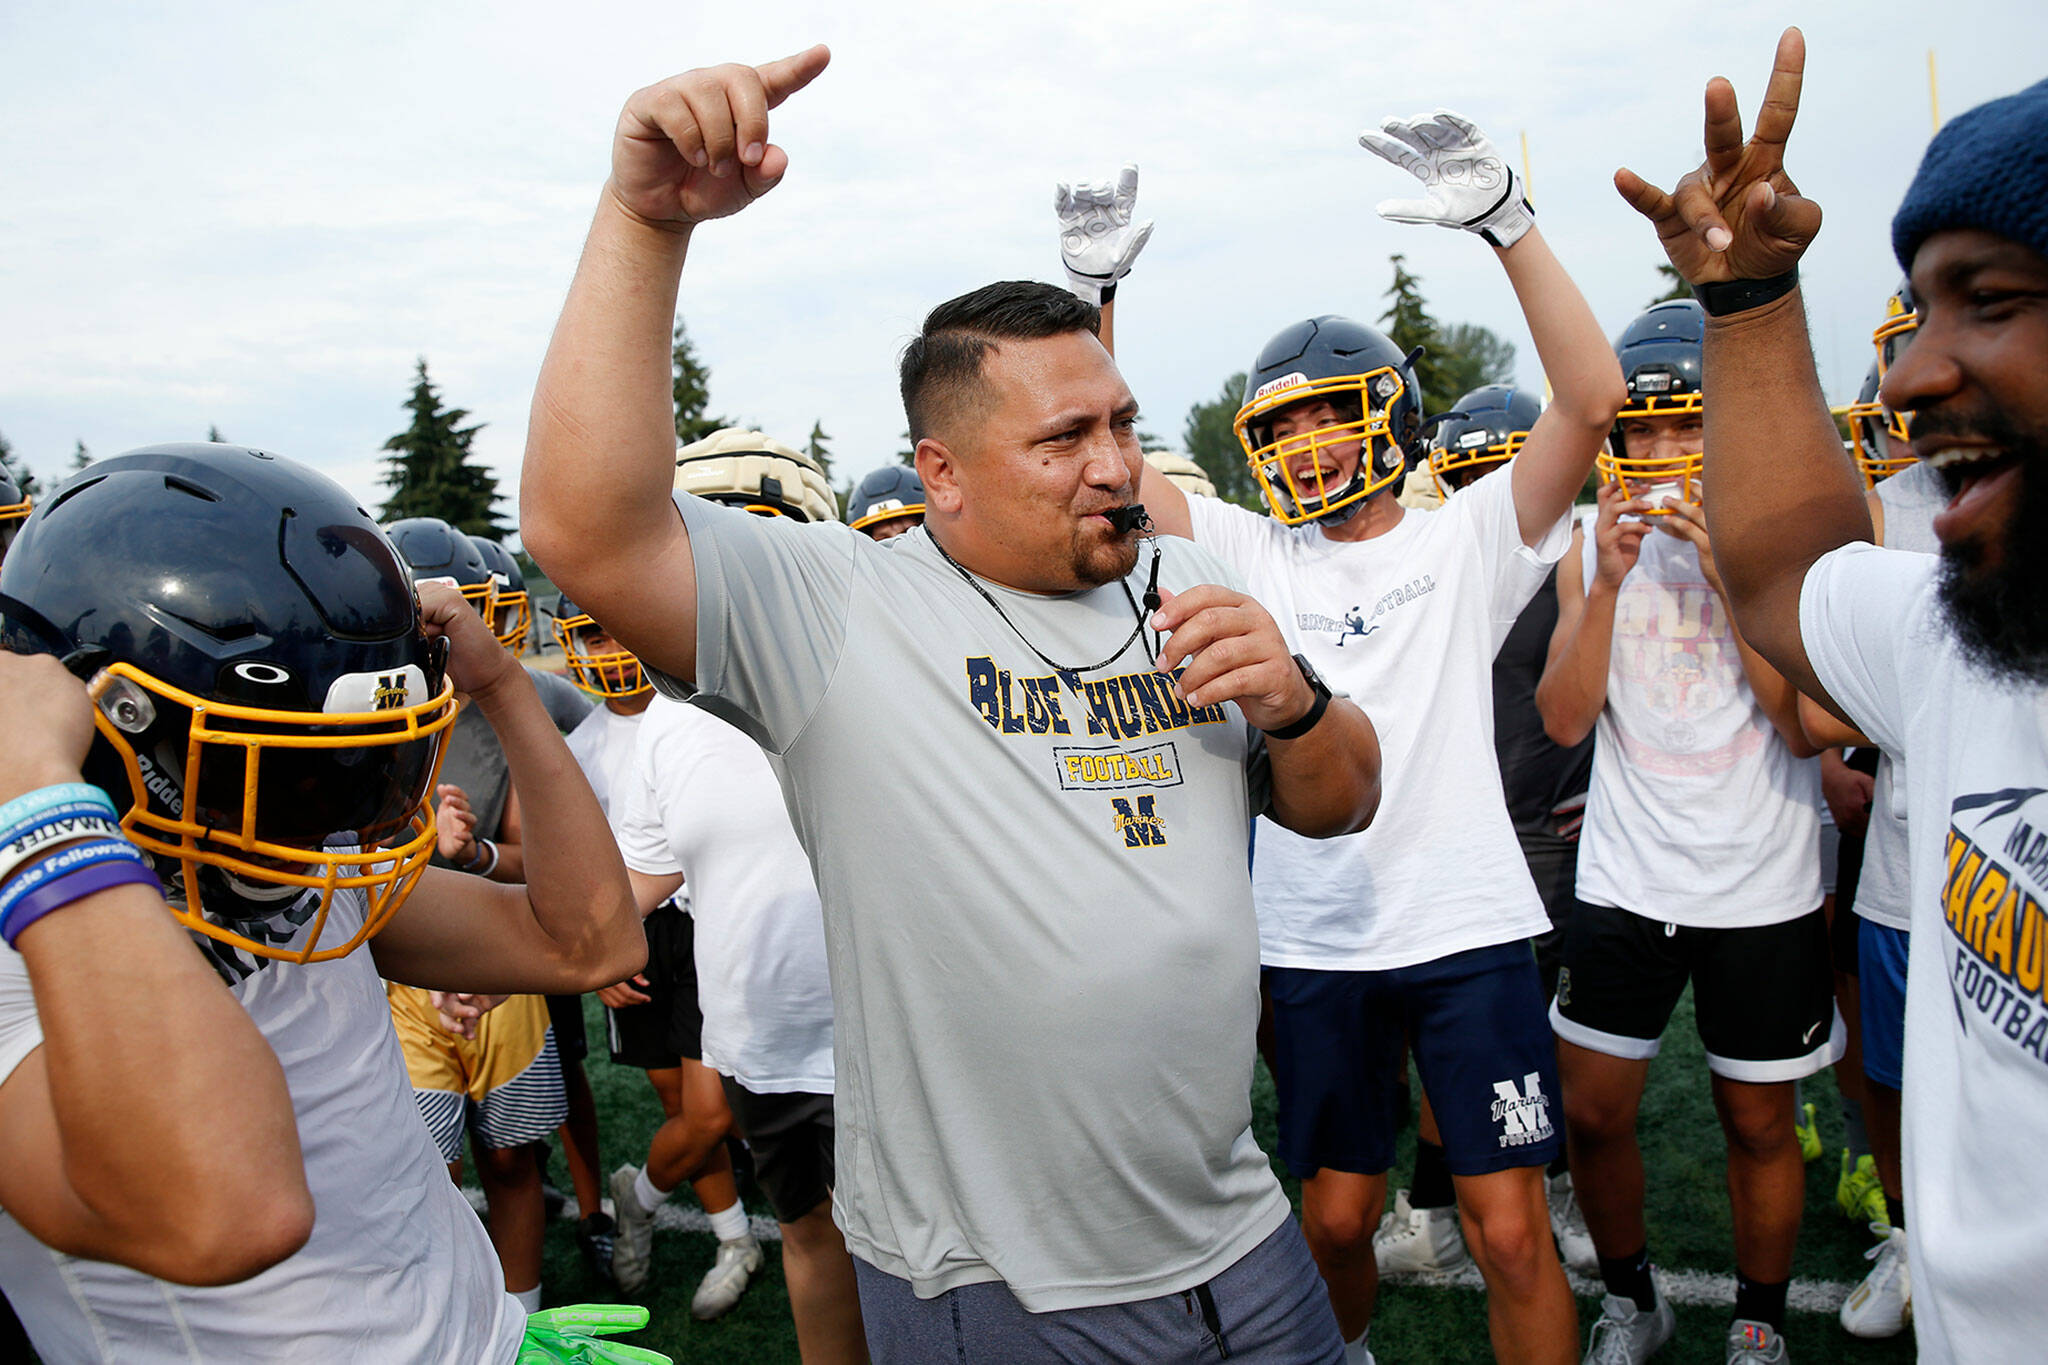 First-year Mariner head football coach Tyler Tuiasosopo gathers his team for a talk between drills during Thursday’s practice. (Ryan Berry / The Herald)